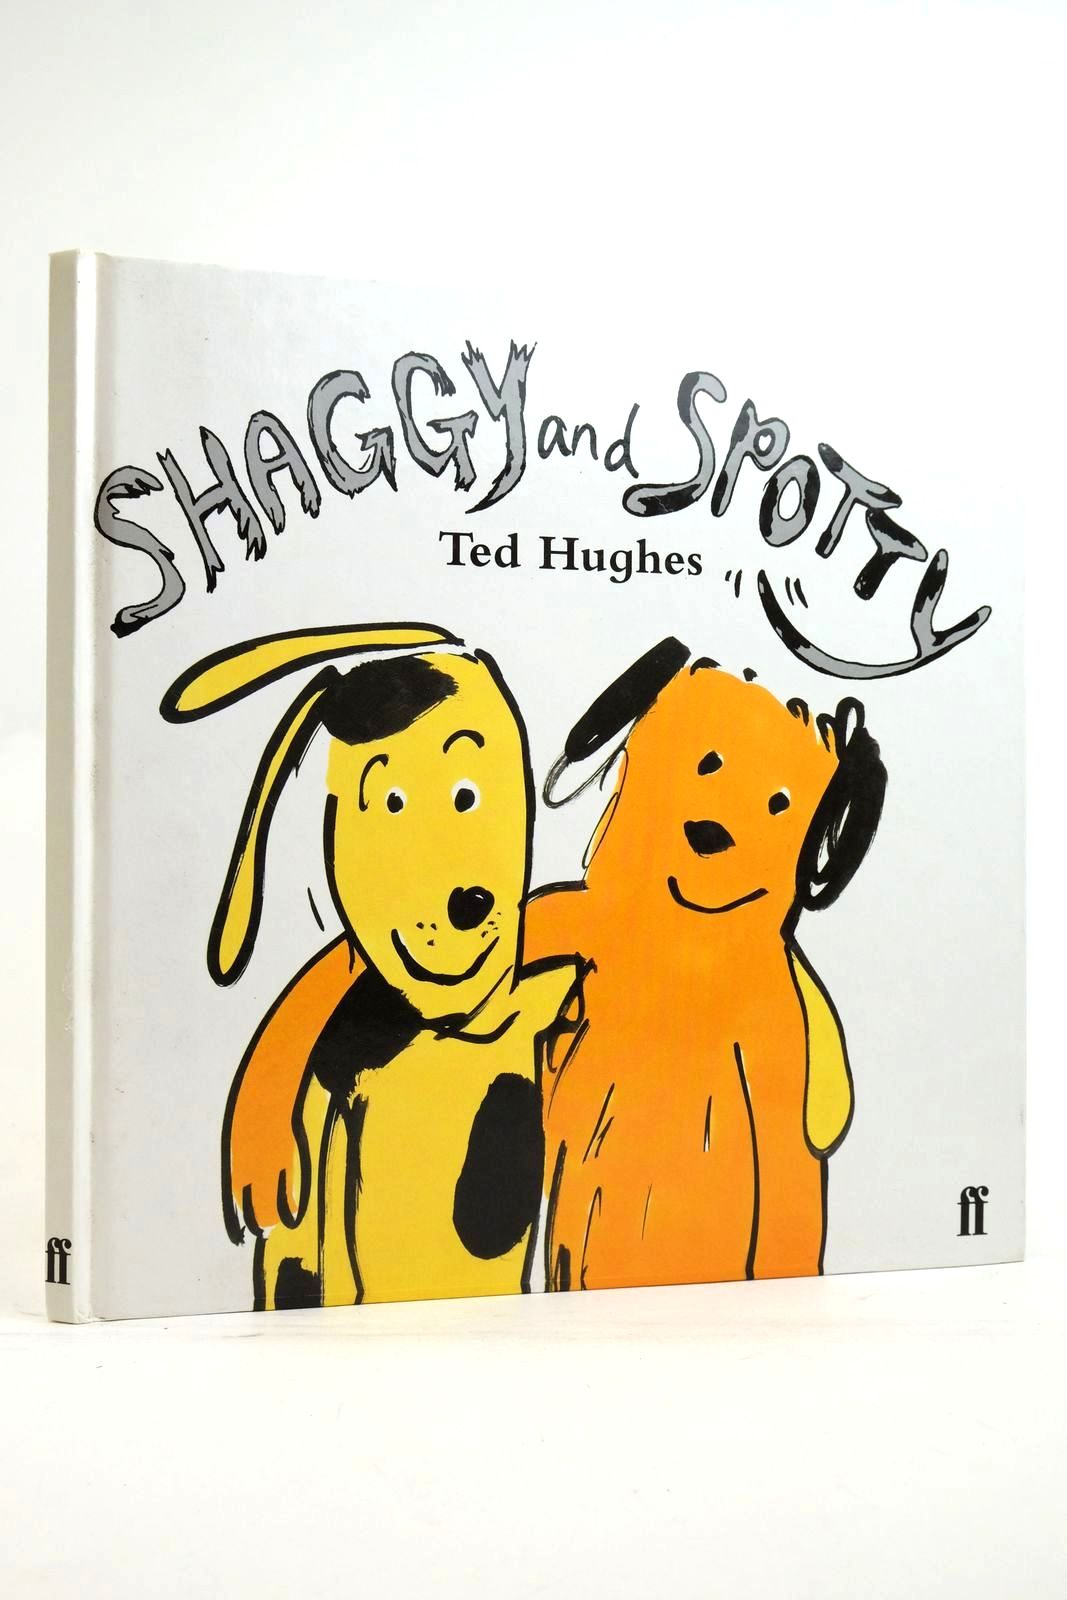 Photo of SHAGGY AND SPOTTY written by Hughes, Ted illustrated by Lucas, David published by Faber &amp; Faber Ltd. (STOCK CODE: 2136463)  for sale by Stella & Rose's Books